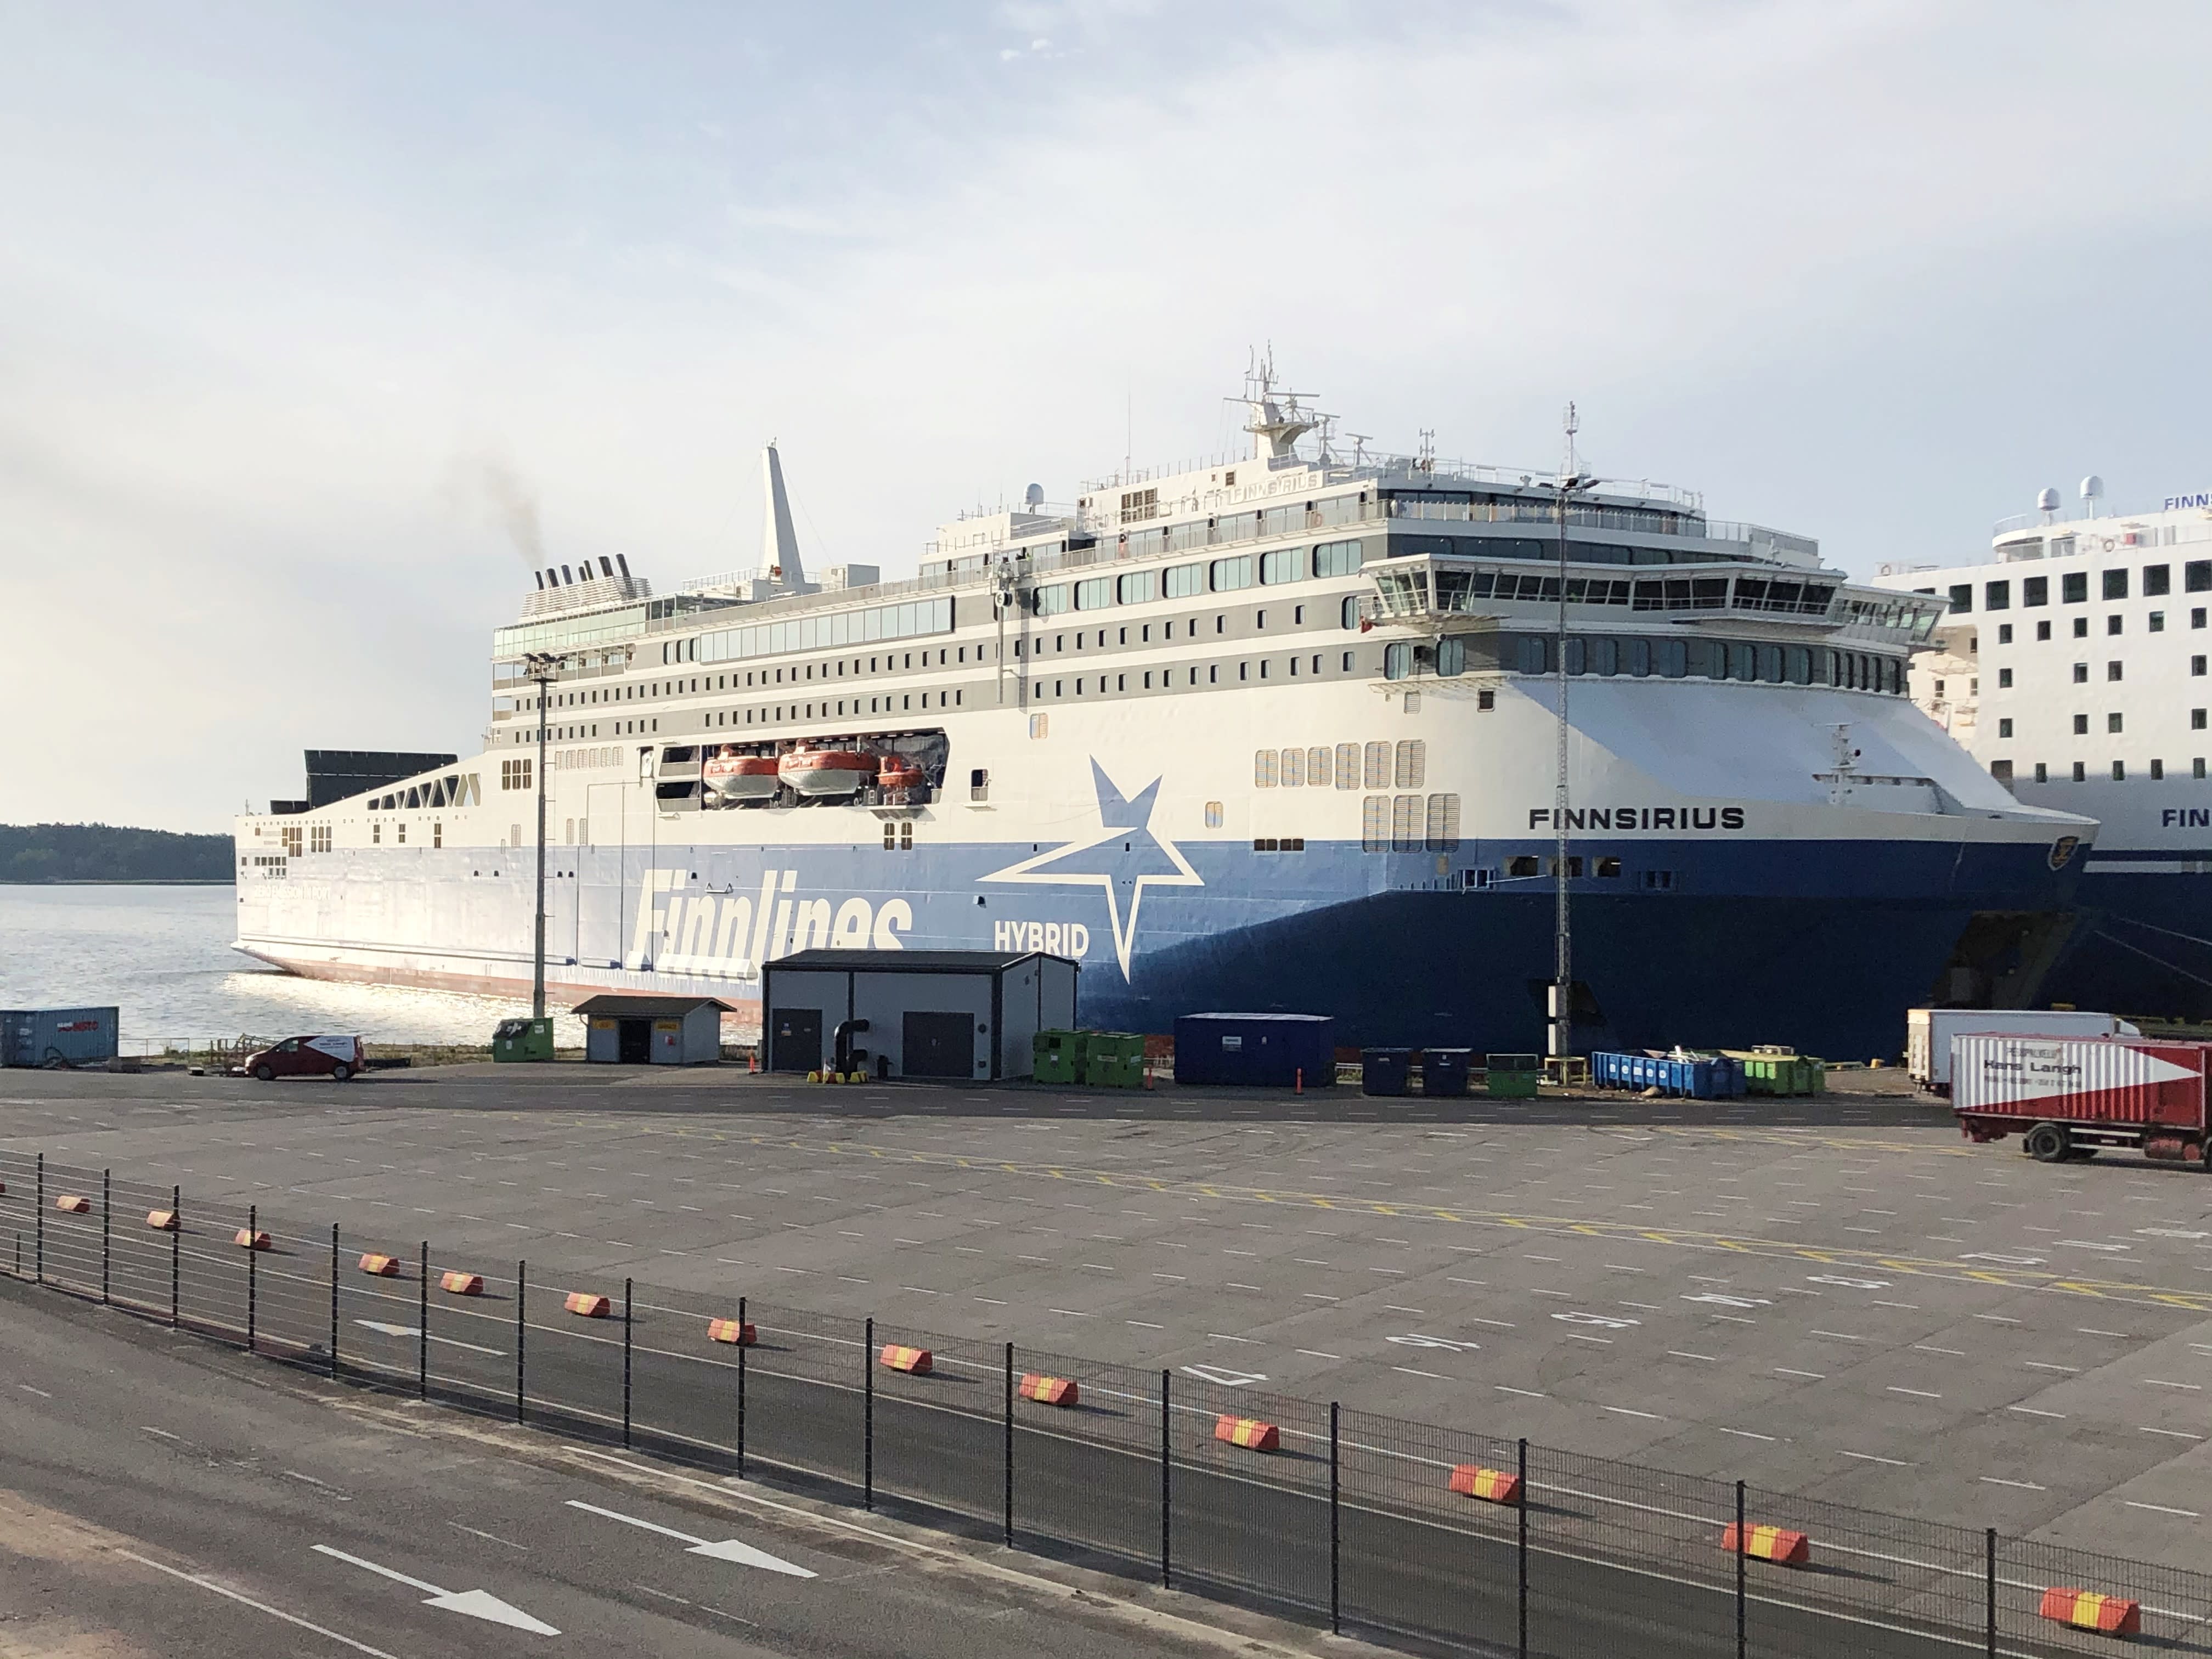 The new ships compete for passengers on ferries between Finland and Sweden